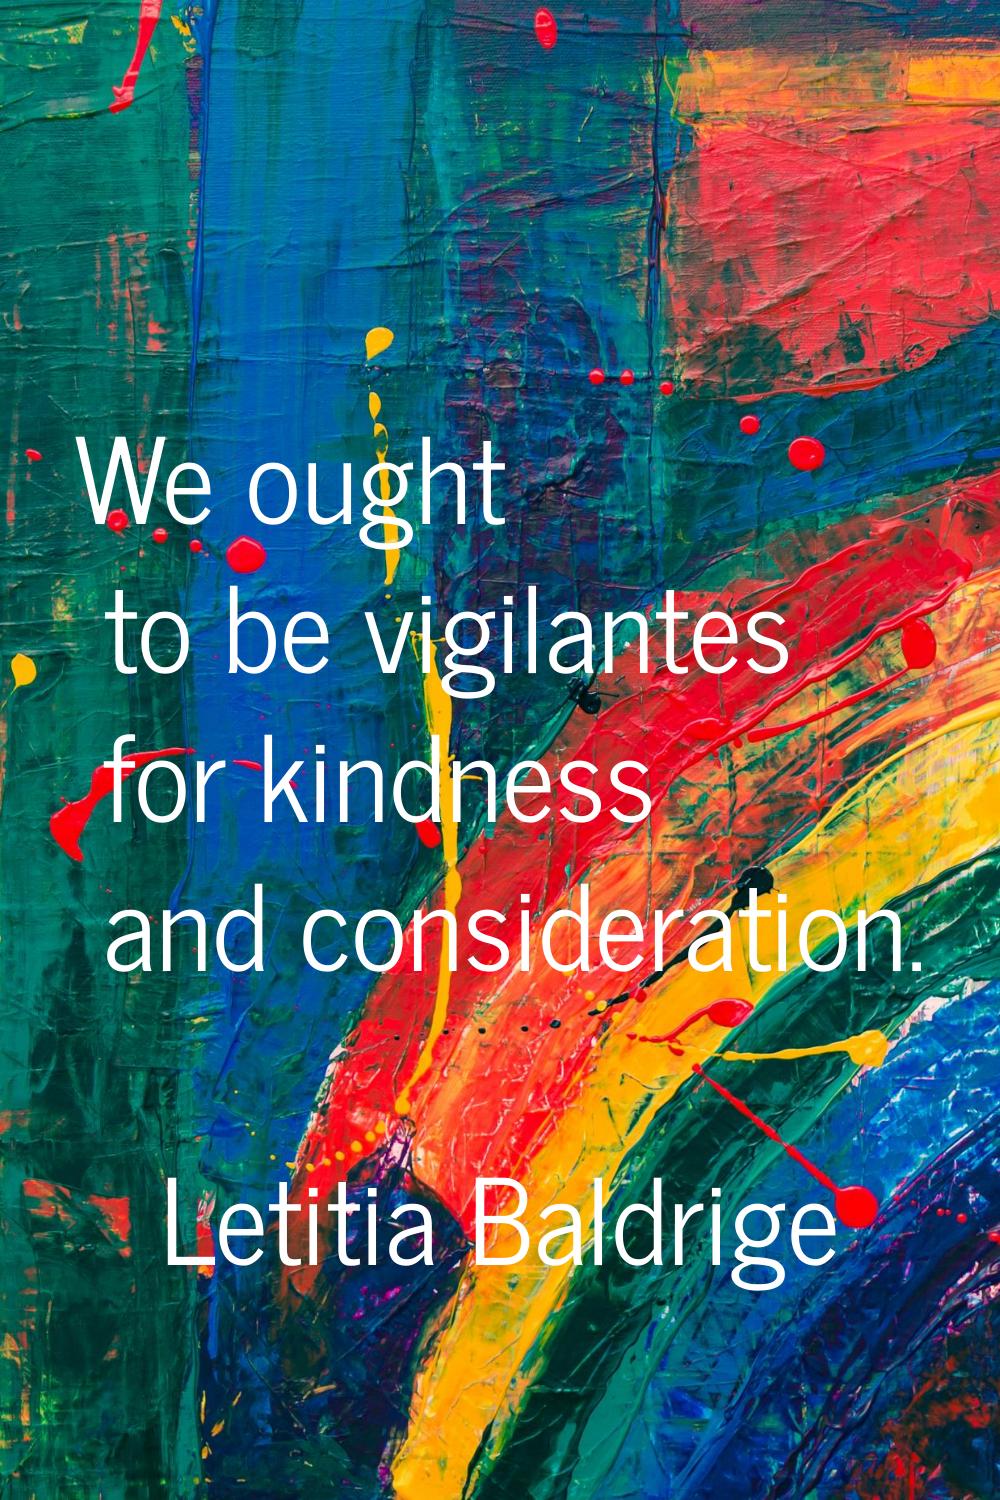 We ought to be vigilantes for kindness and consideration.